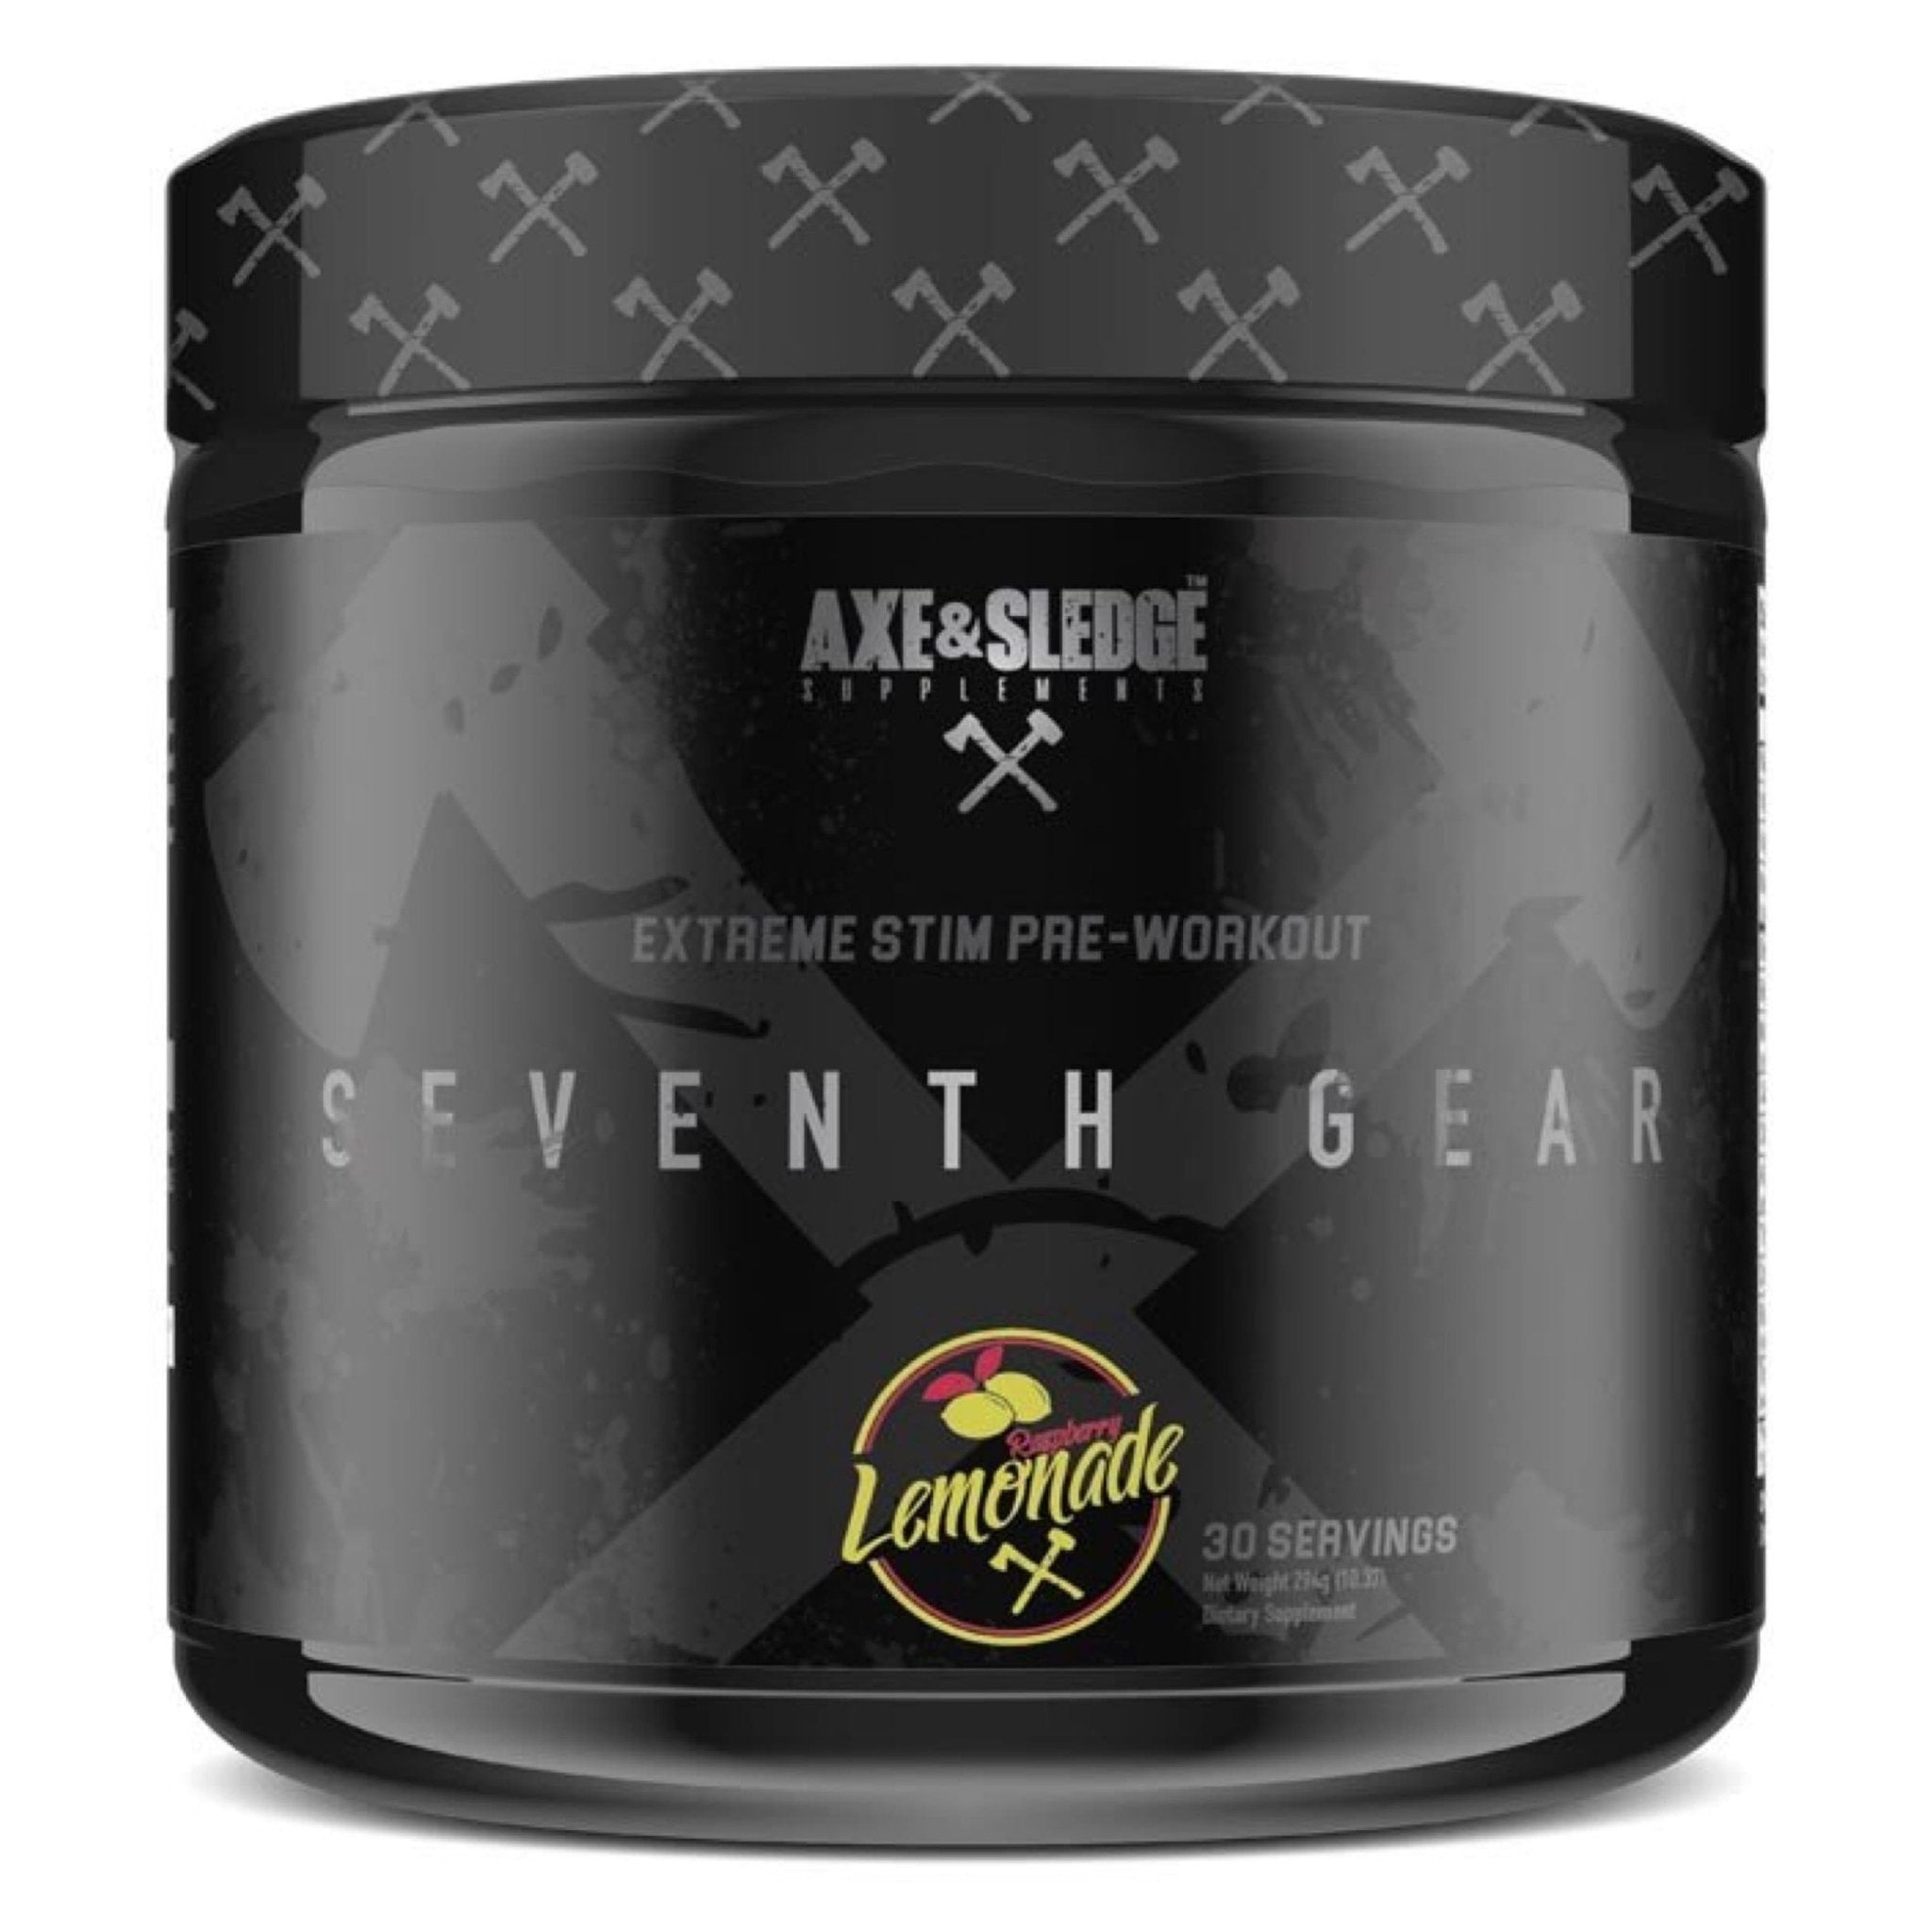 AXE & SLEDGESeventh GearStimulant Pre-WorkoutRED SUPPS